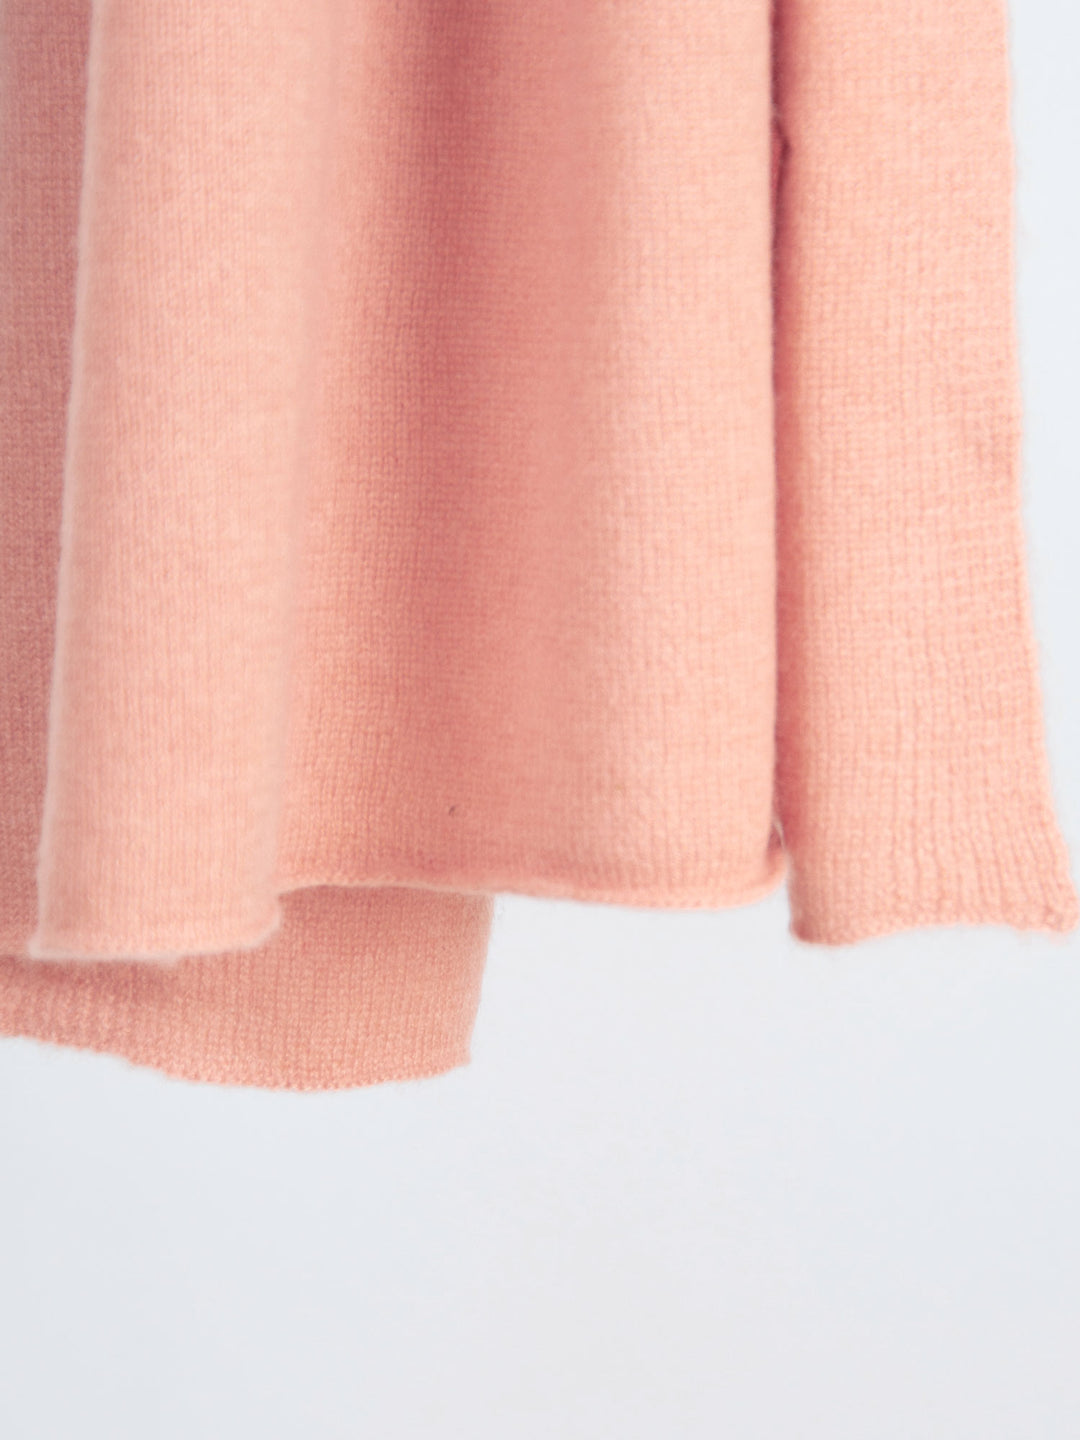 Cashmere scarf "Signature" in 100% cashmere. Color: Peachy pink. Scandinavian design by Kashmina